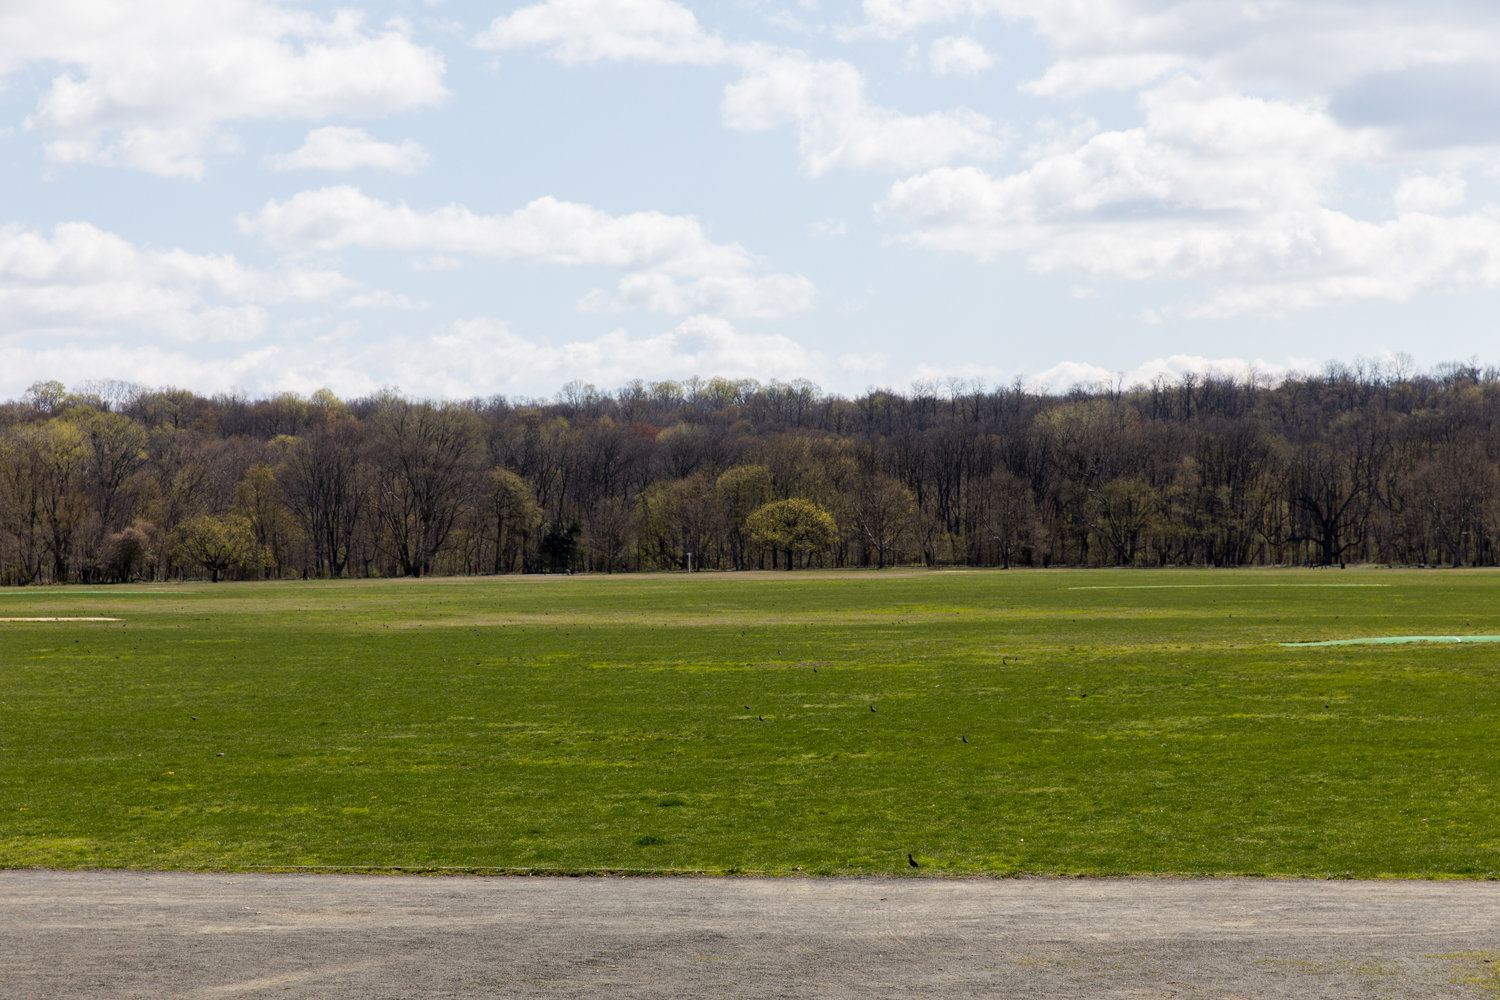 The contract for a COVID-19 field hospital in Van Cortlandt Park has been scrapped for now, pulling down the fencing in part of the park where the emergency facility would have been constructed.